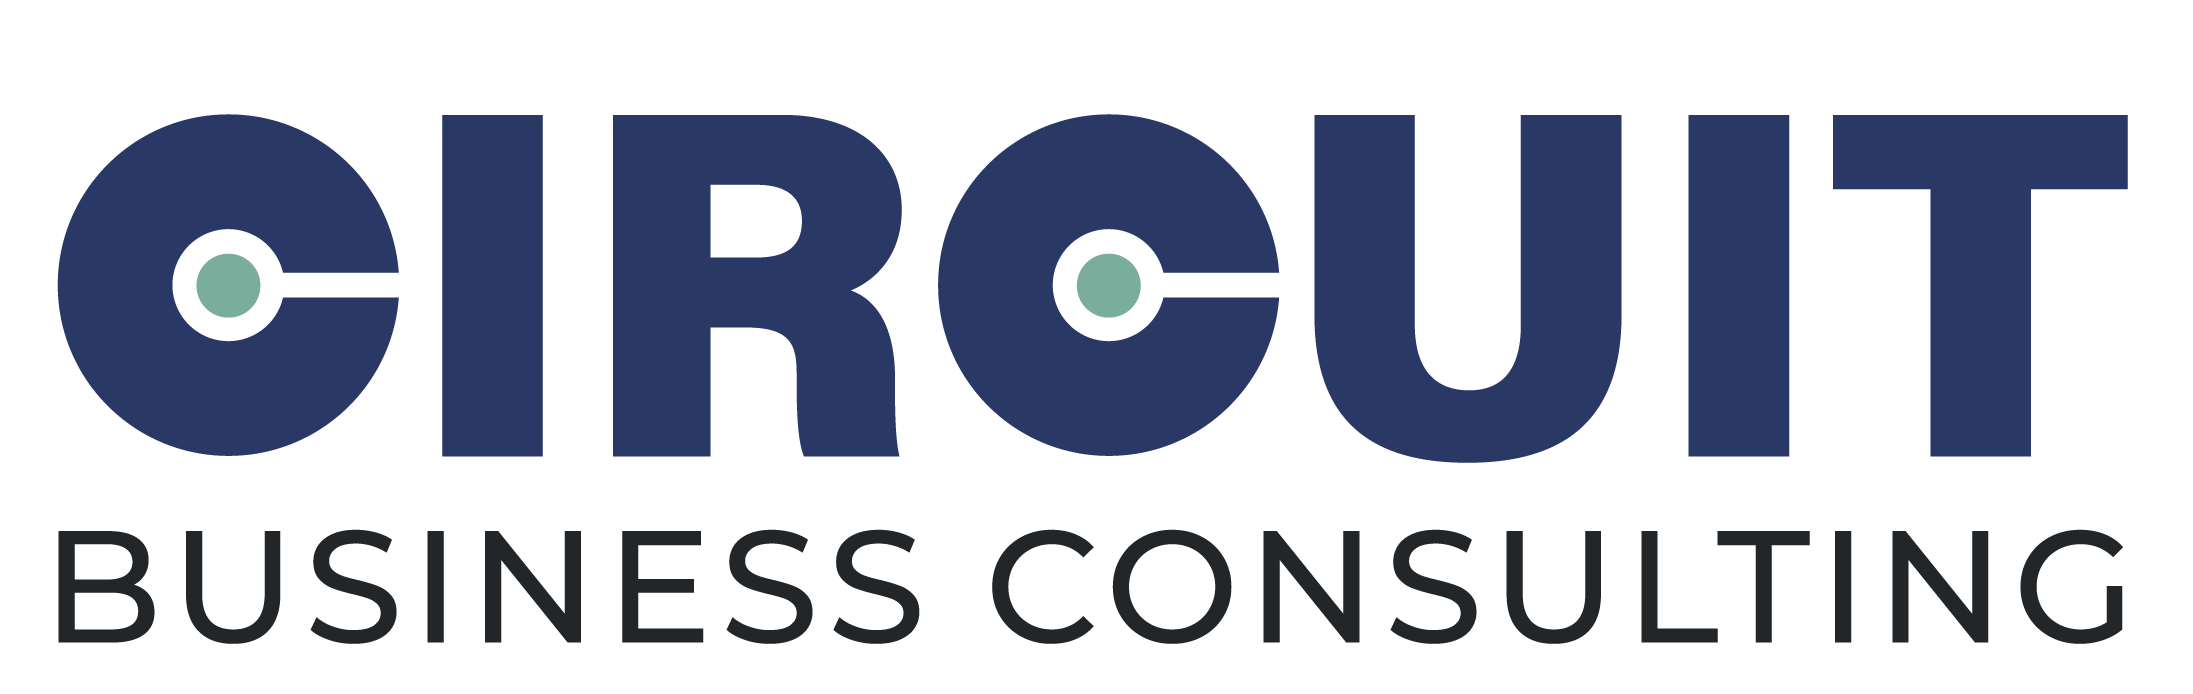 CBC - Circuit Business Consulting